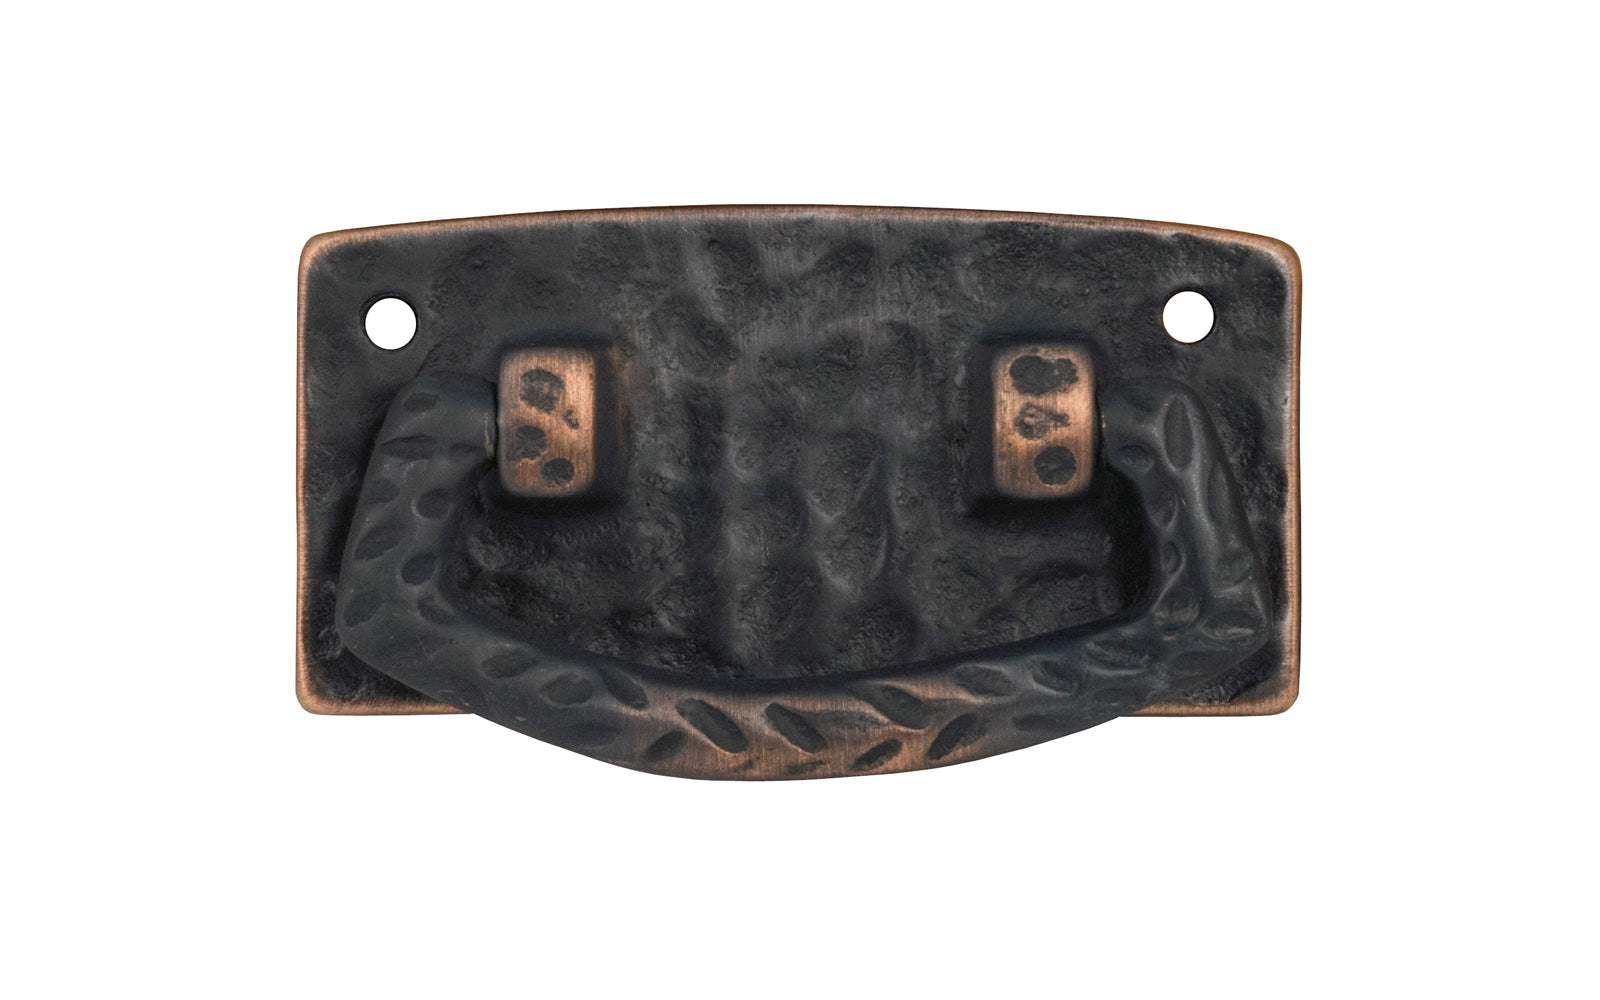 Vintage-style Hardware · Solid Brass Hammered Drop Pull. The pull plate has a hammered surface that gives a rustic & stylish look. Designed in the Mission or Arts & Crafts style, Gustav Stickley style hardware. Antique copper finish trim.